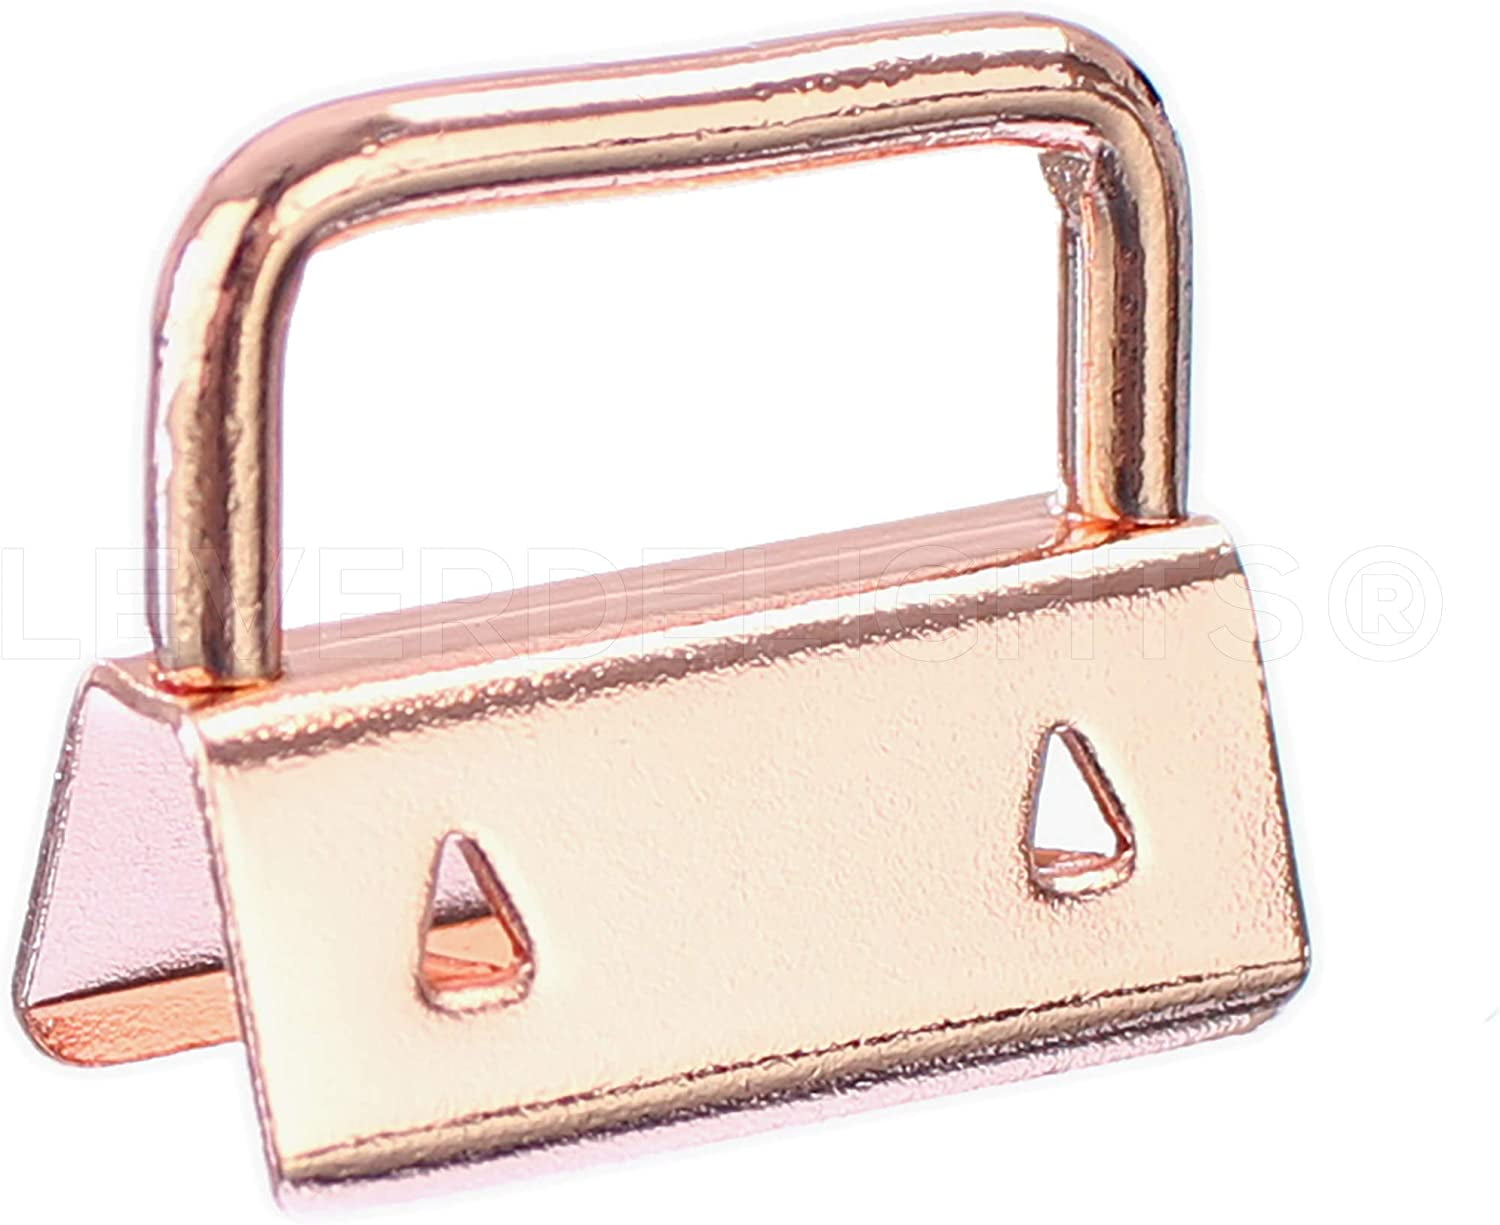 CleverDelights 1 Swivel Lobster Clasps with Key Rings - Rose Gold